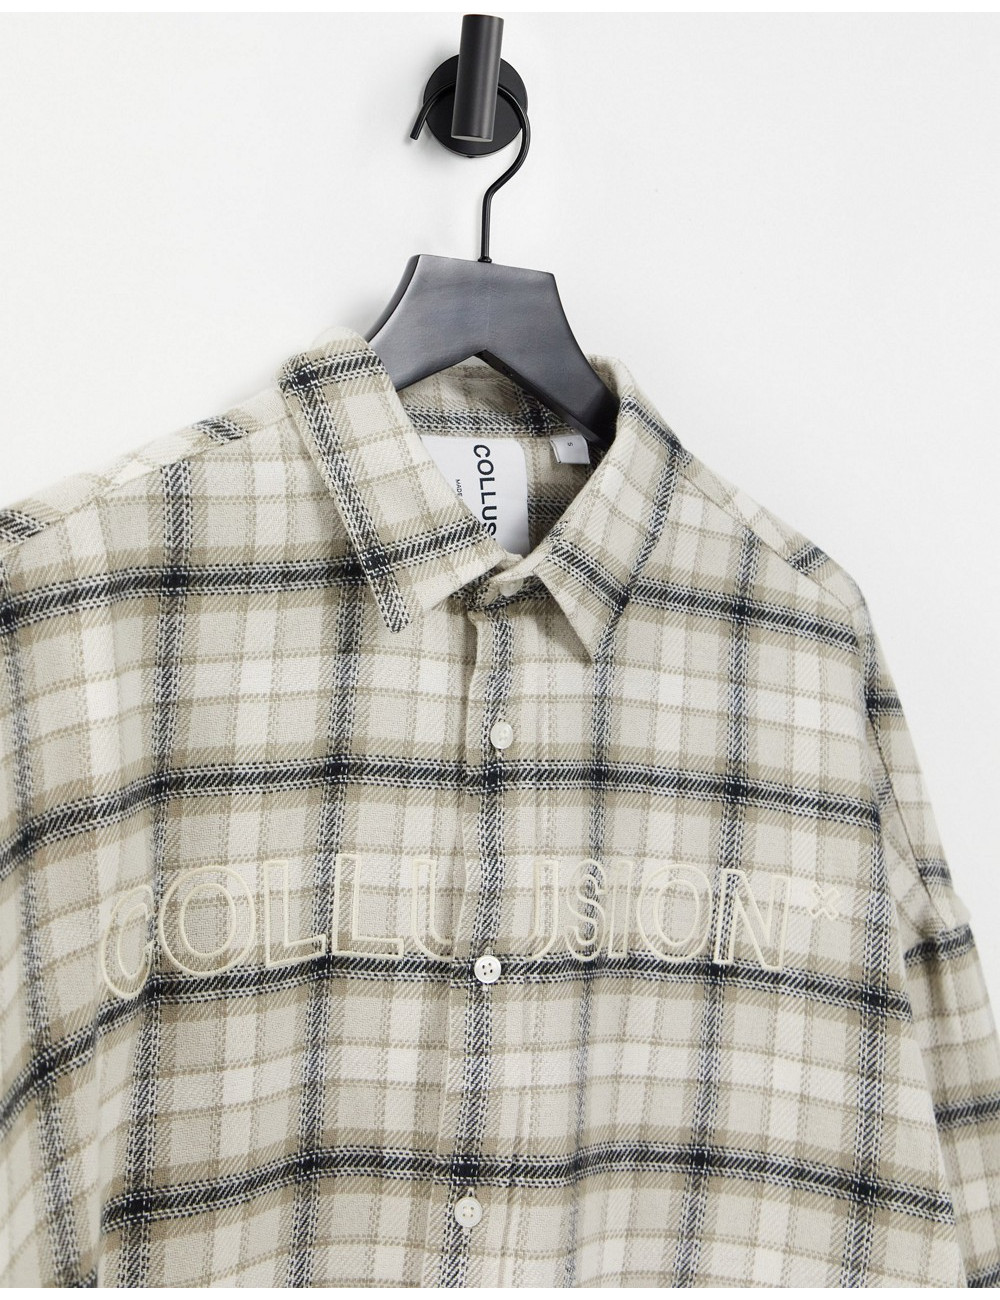 COLLUSION Unisex check shacket